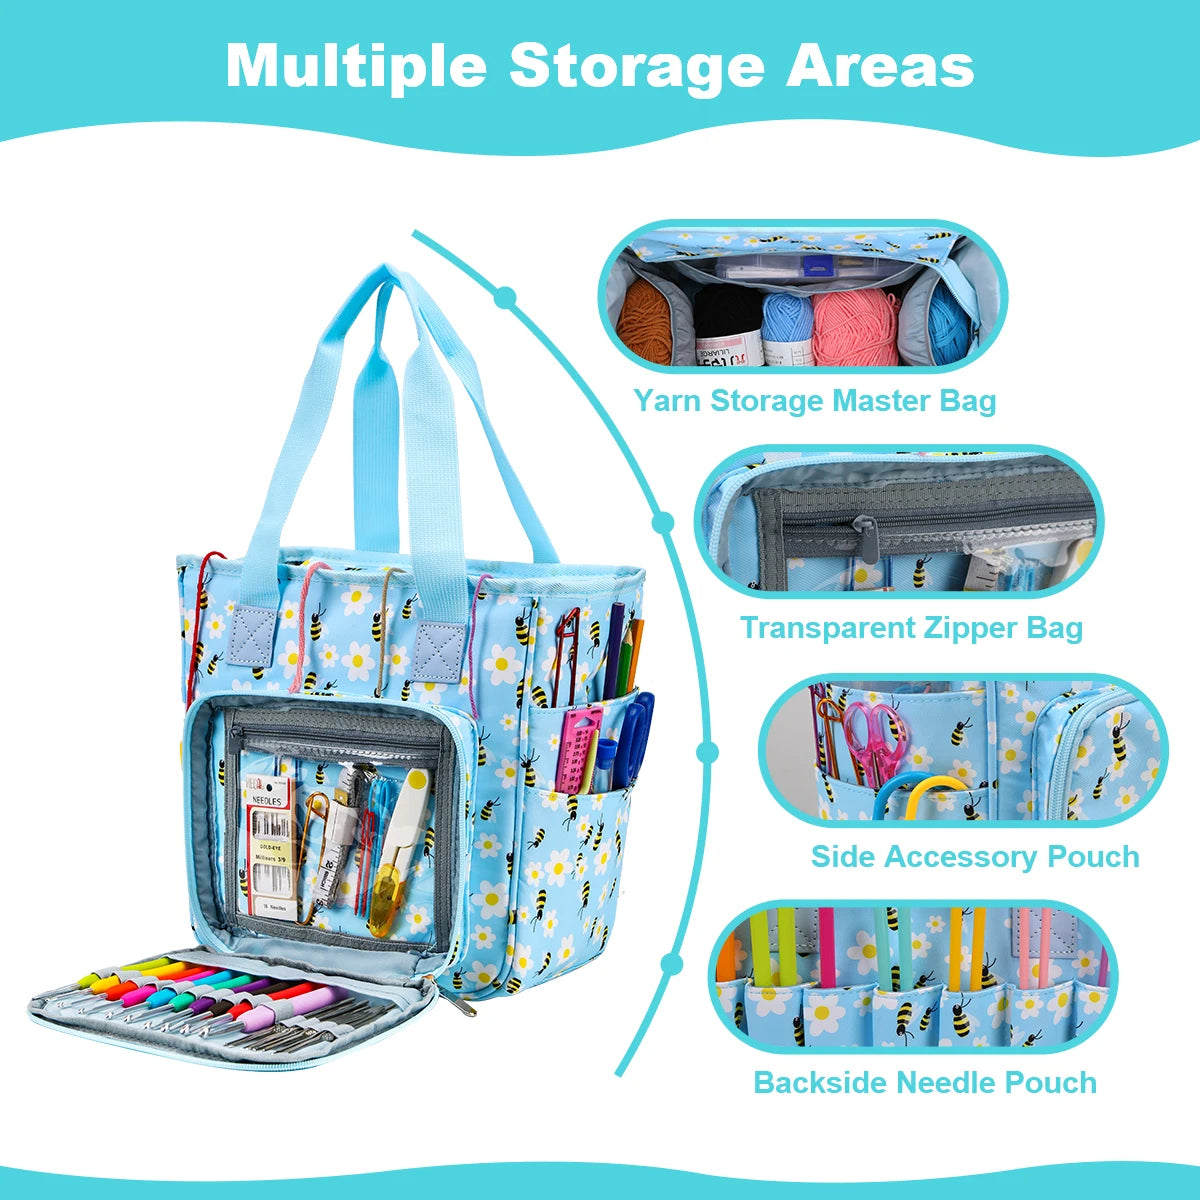 Image of a floral-design Multifunctional Knitting Tote Bag: Yarn Storage Organizer. This yarn storage organizer features a yarn storage master section, transparent zipper bag, side accessory pouch, and backside needle pouch, perfect for all your knitting supplies.